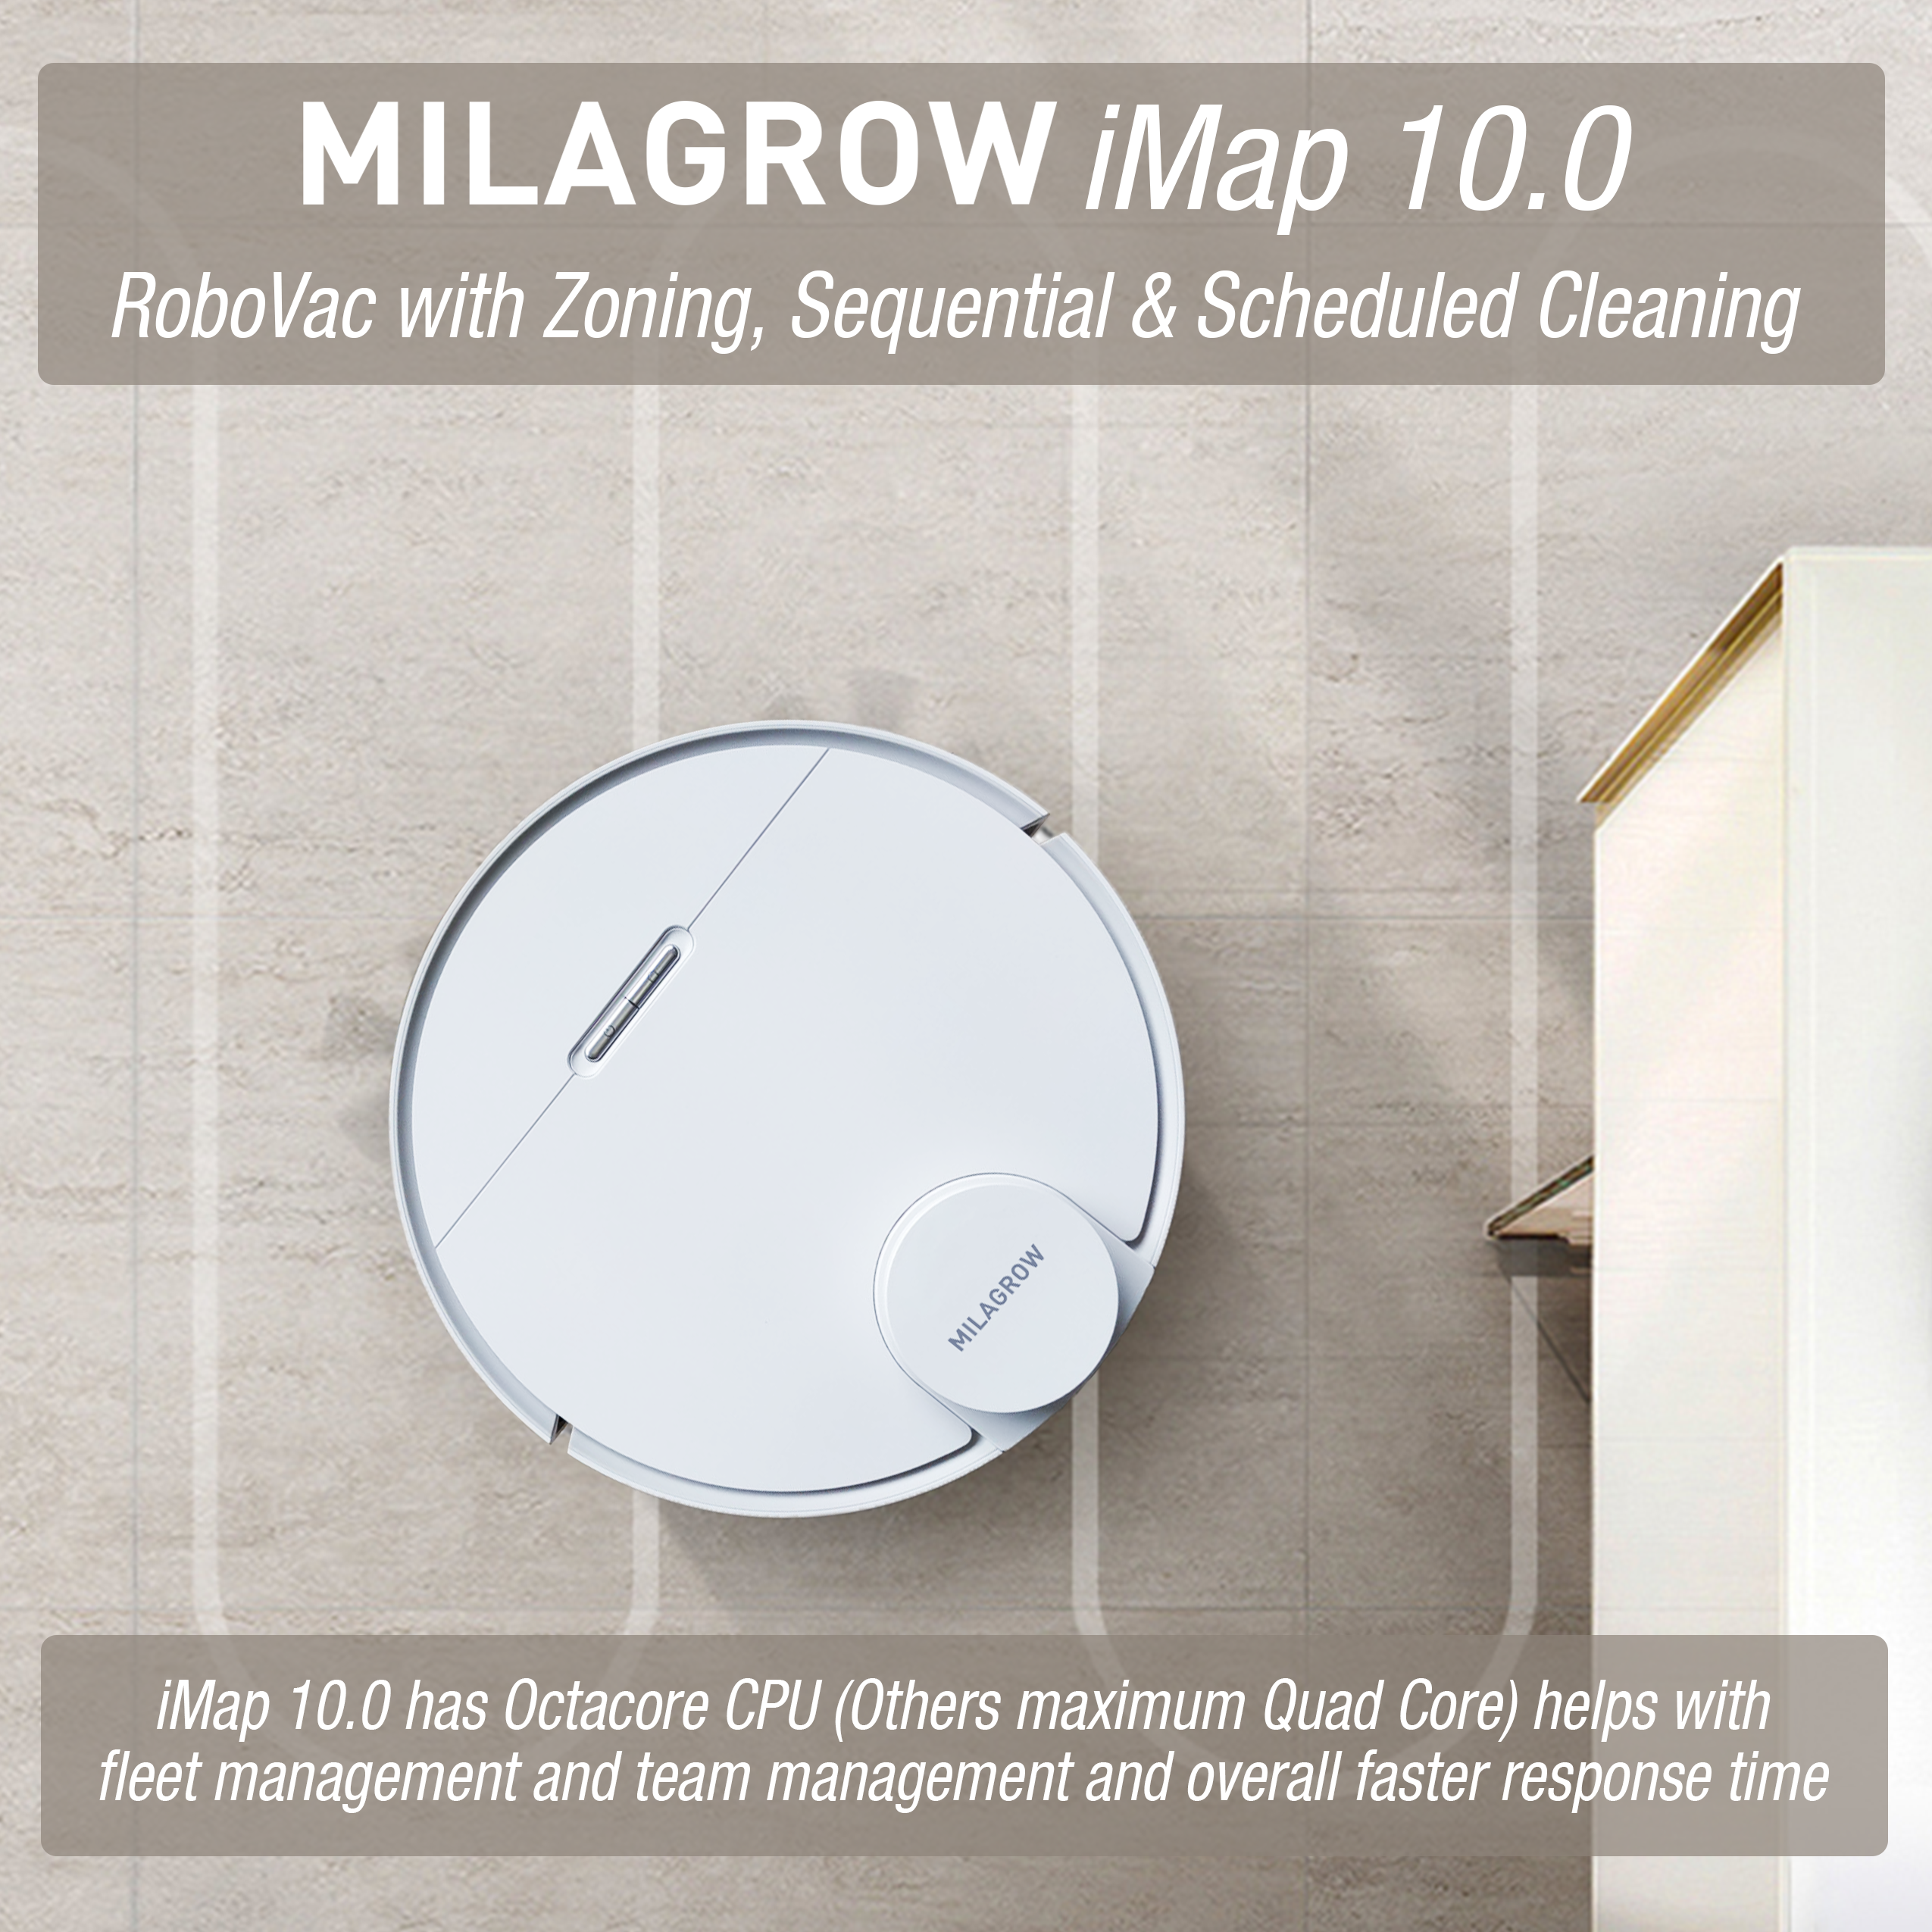 Milagrow Launches World’s First Robotic Vacuum Cleaner, 3 New Floor Robots with Independent Navigation Features on Amazon Prime Days (6th and 7th Aug)